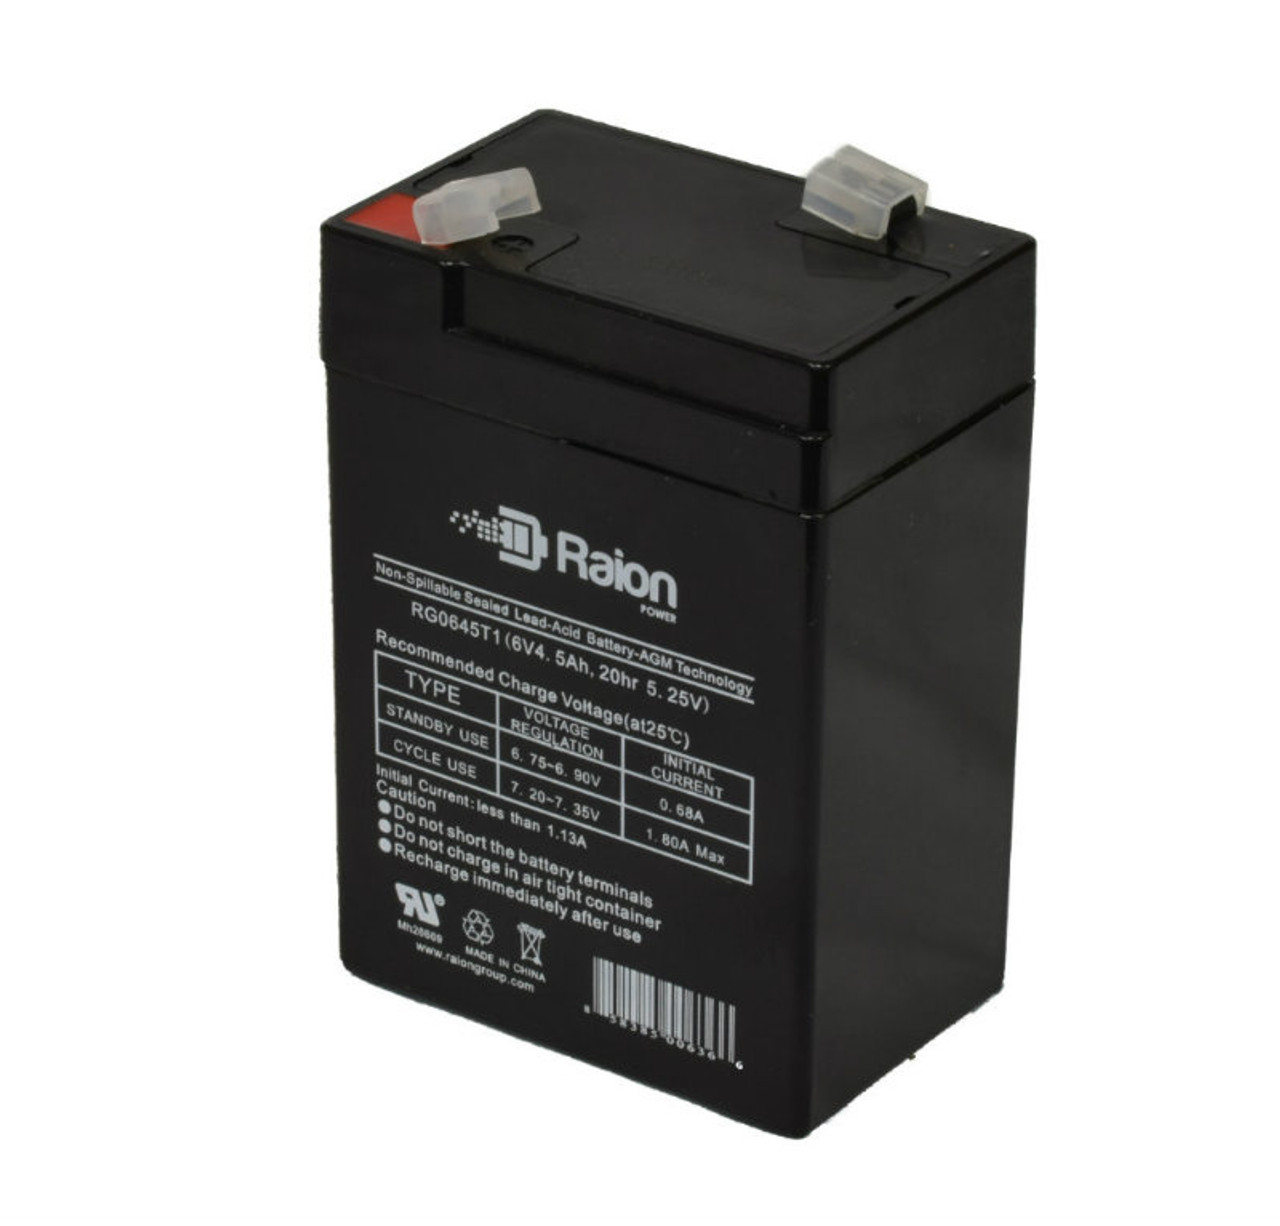 Raion Power RG0645T1 6V 4.5Ah Replacement Battery Cartridge for Exell EB645